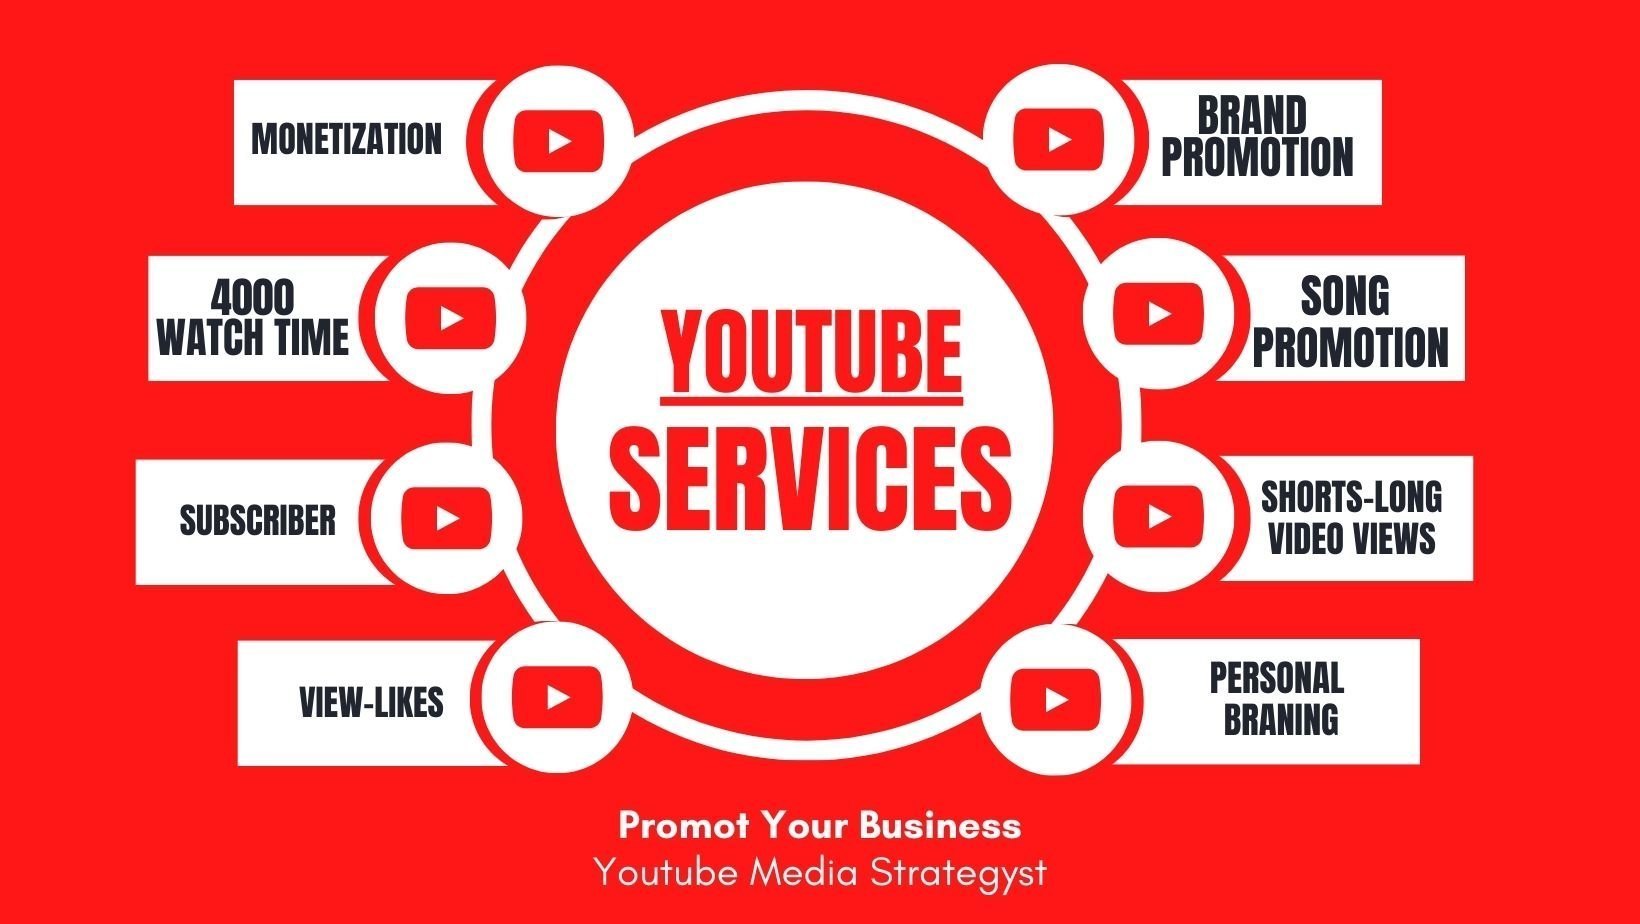 how to increase views on youtube, youtube marketing agency in mumbai,, youtube advertising companies, youtube marketing companies, how to get more views on youtube shorts 2022, youtube viral marketing, youtube marketing company in delhi, buy real youtube views with paypal, how to get more views on youtube, advertise youtube channel, YouTube Promotion Services in Manchester, YouTube Promotion Services in Manchester